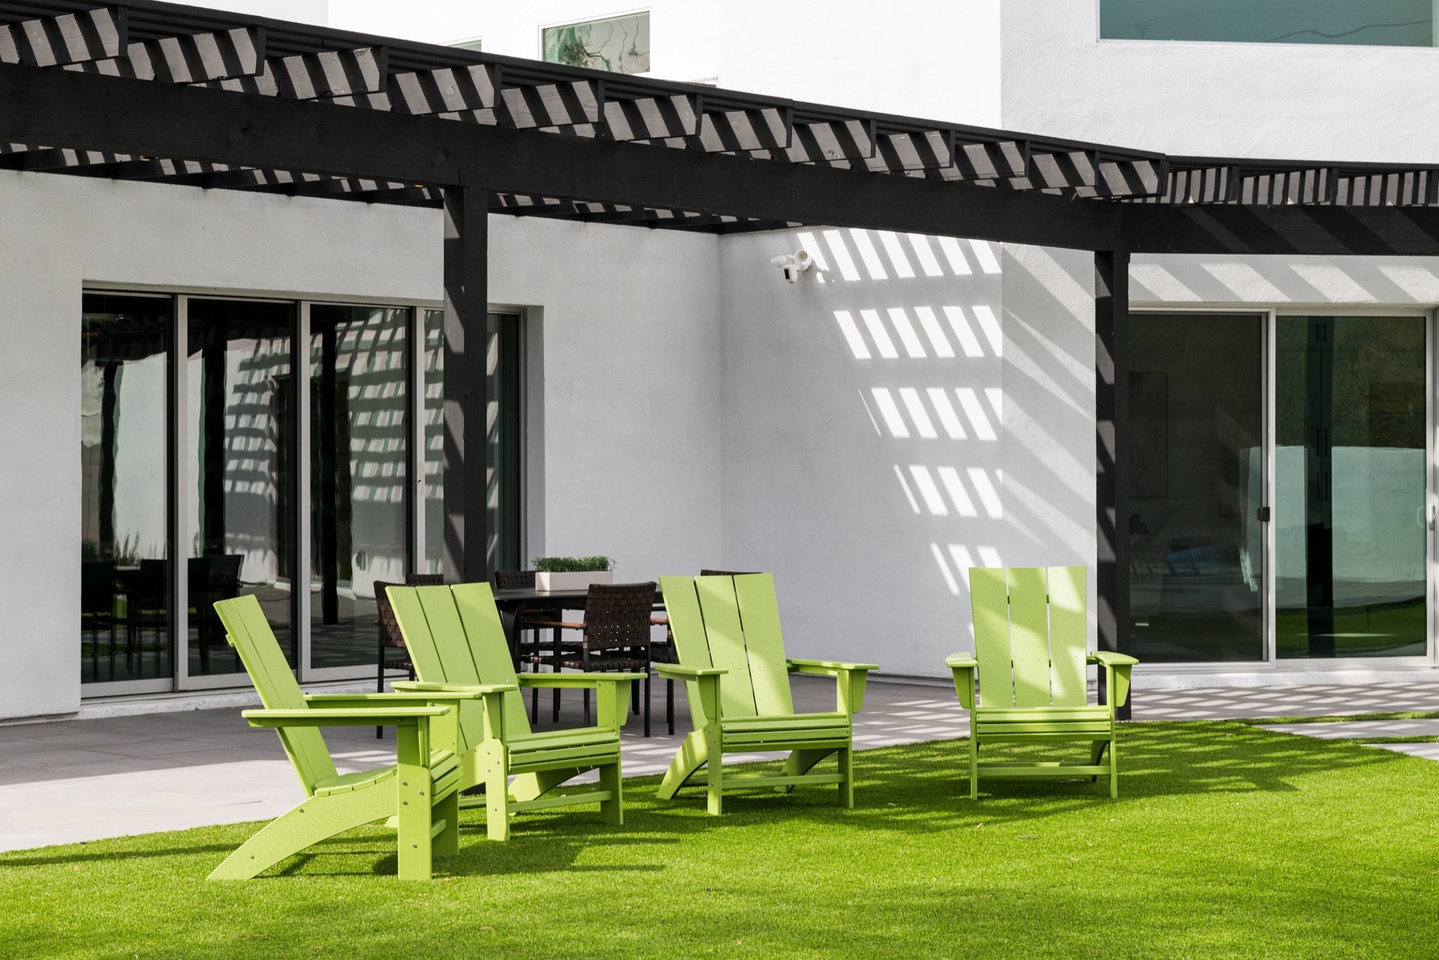 High quality outdoor seating